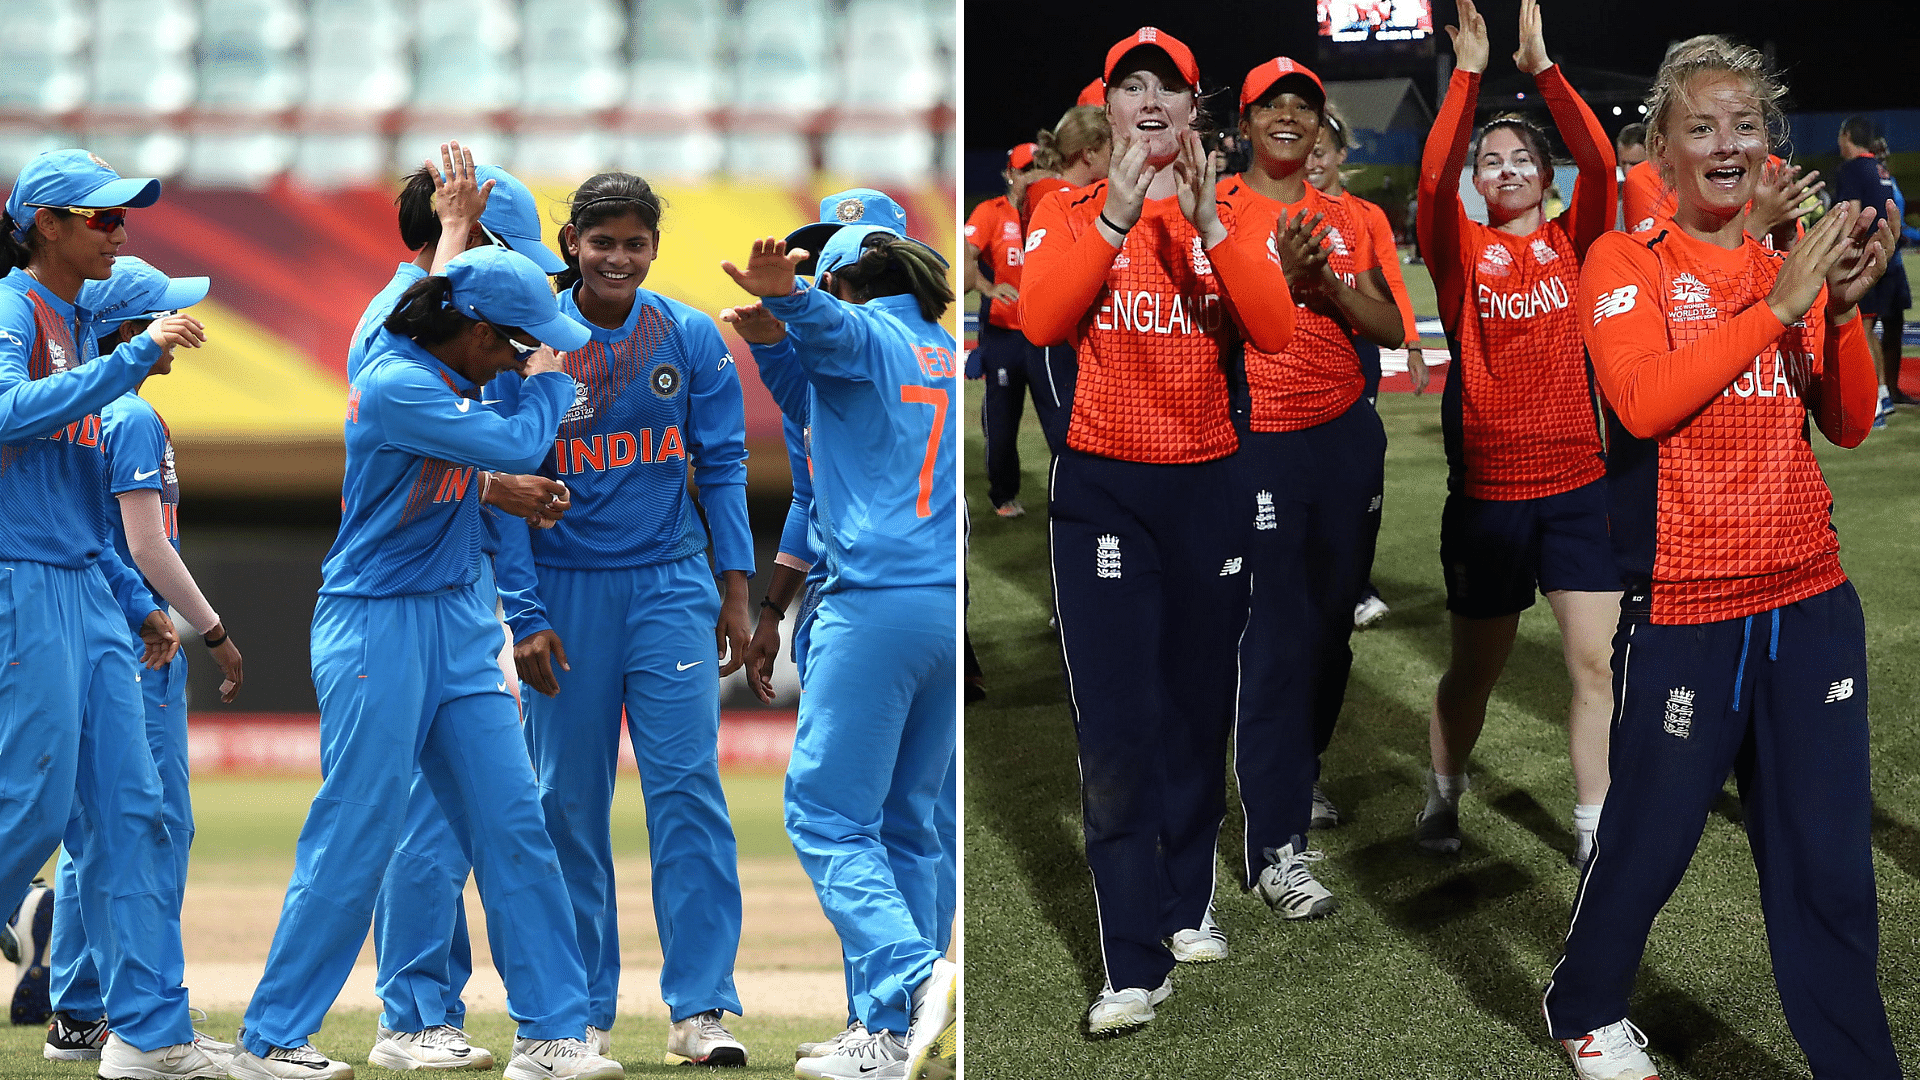 India and England lock horns in the semi-final of the ICC Women’s World T20 2018 in Antigua at 5:30 am IST on Friday, 23 November.